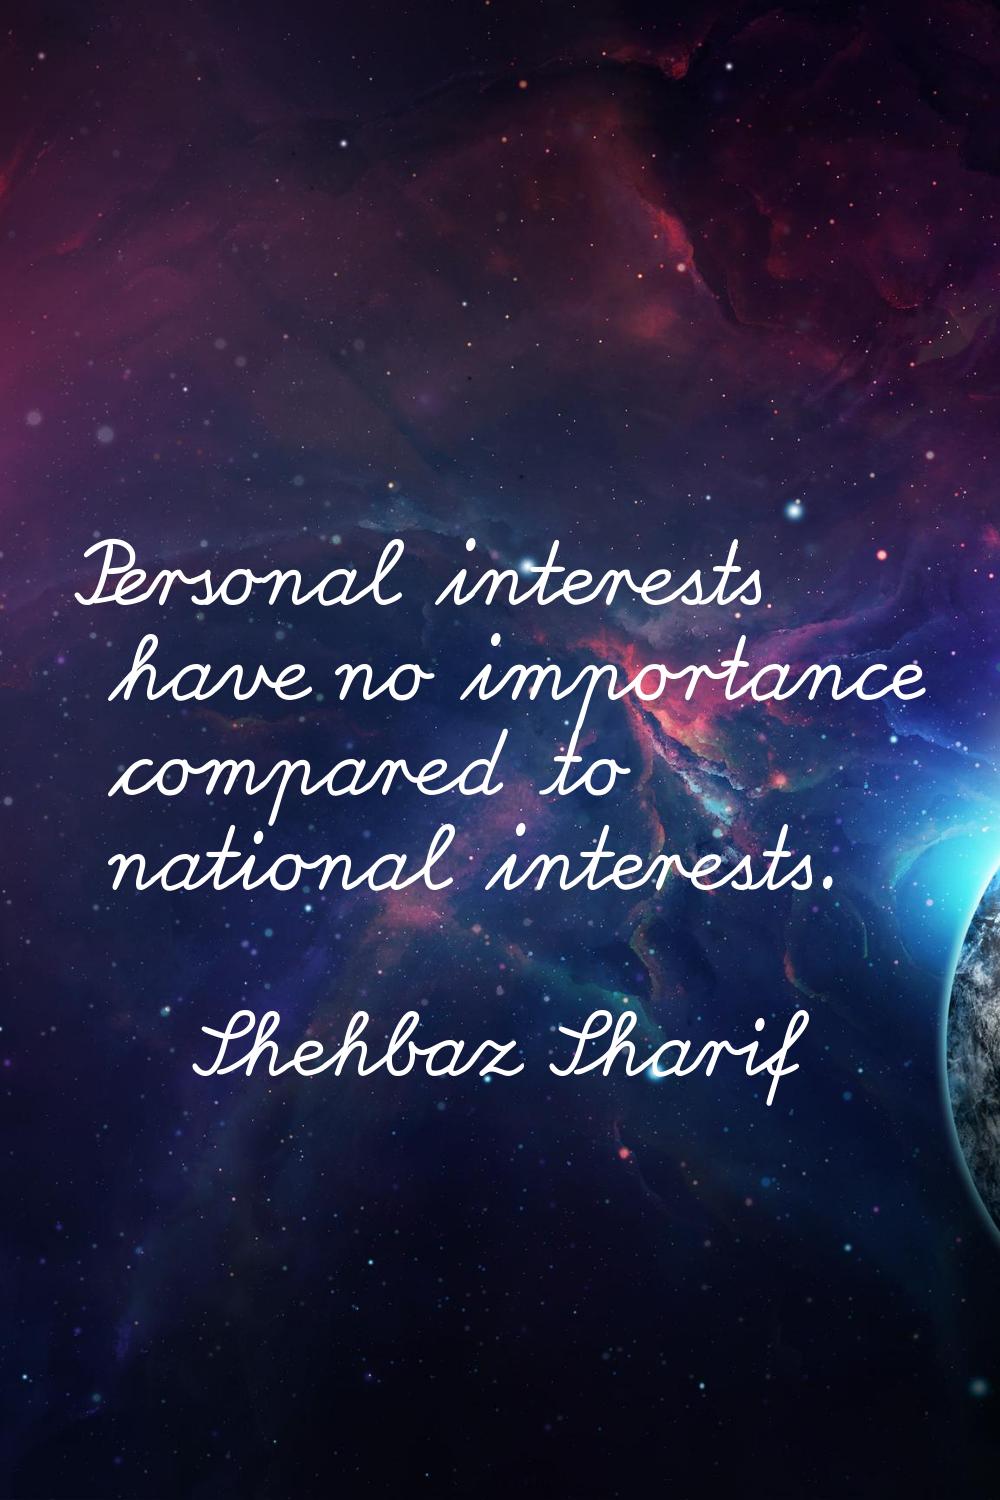 Personal interests have no importance compared to national interests.